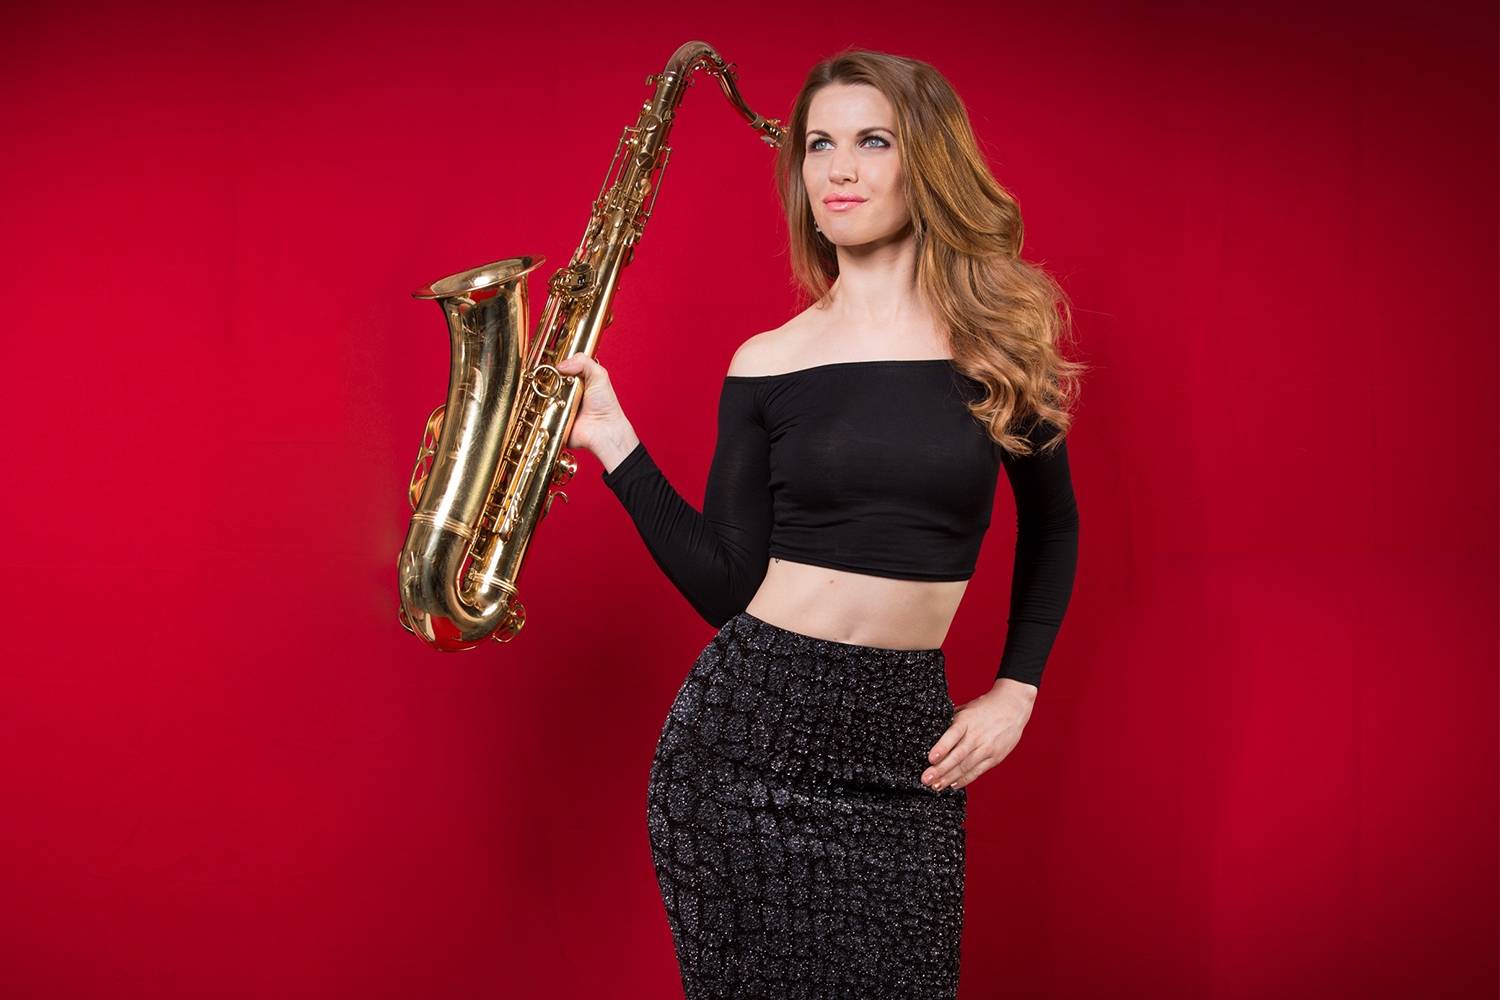 Female Solo Saxophonist